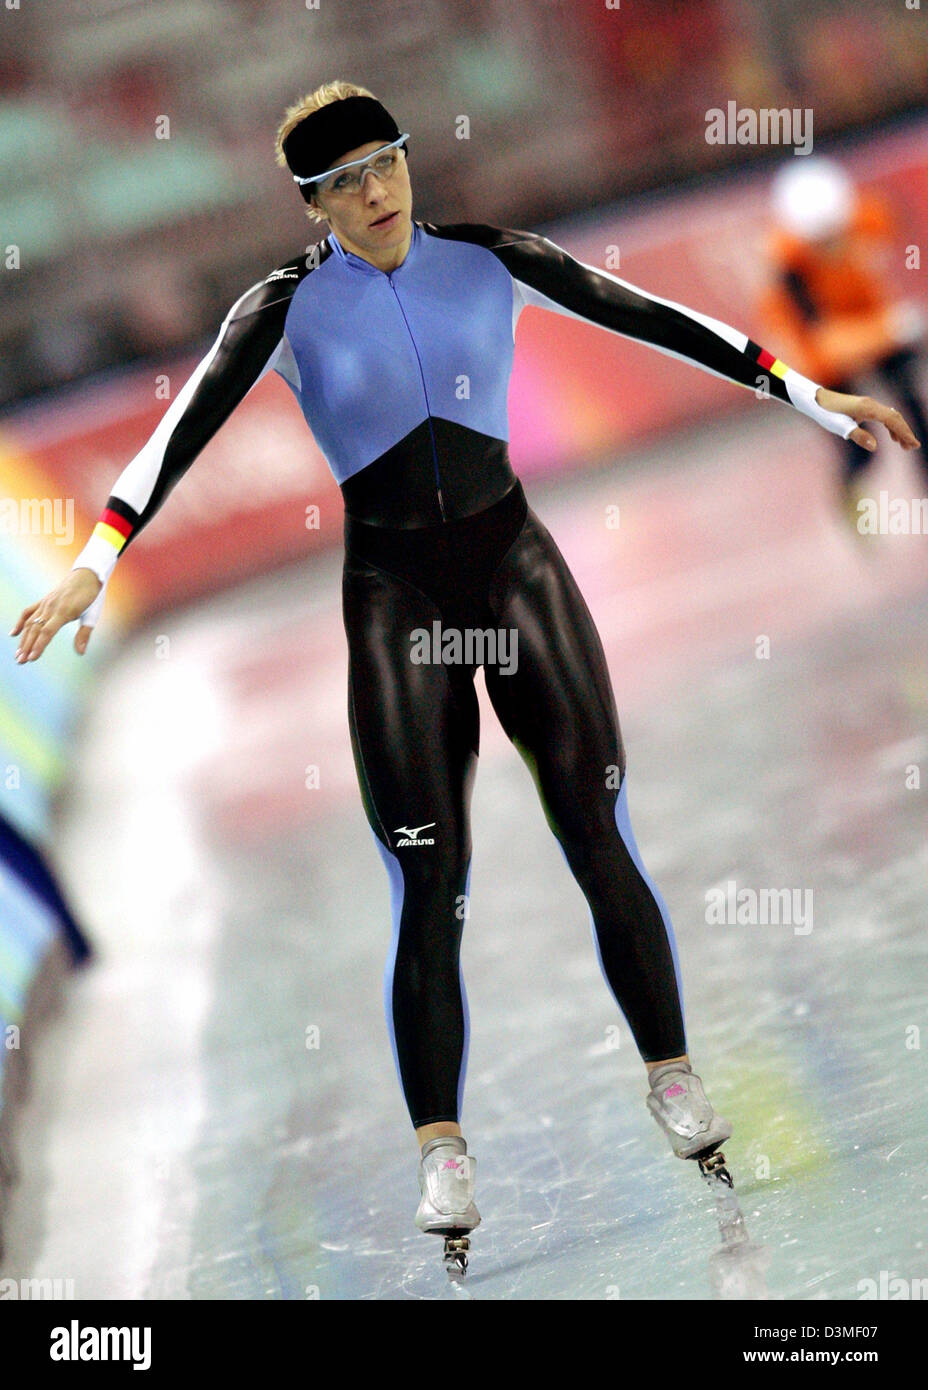 German speed skater Anni Friesinger conducts a stretching exercise during a practice session on the ice rink at the Turin Winter Olympics in Turin, Italy, Wednesday, 22 February 2006.  Friesinger won bronze in the Women's 1,500 metre Speed Skating event. Photo: Frank May Stock Photo